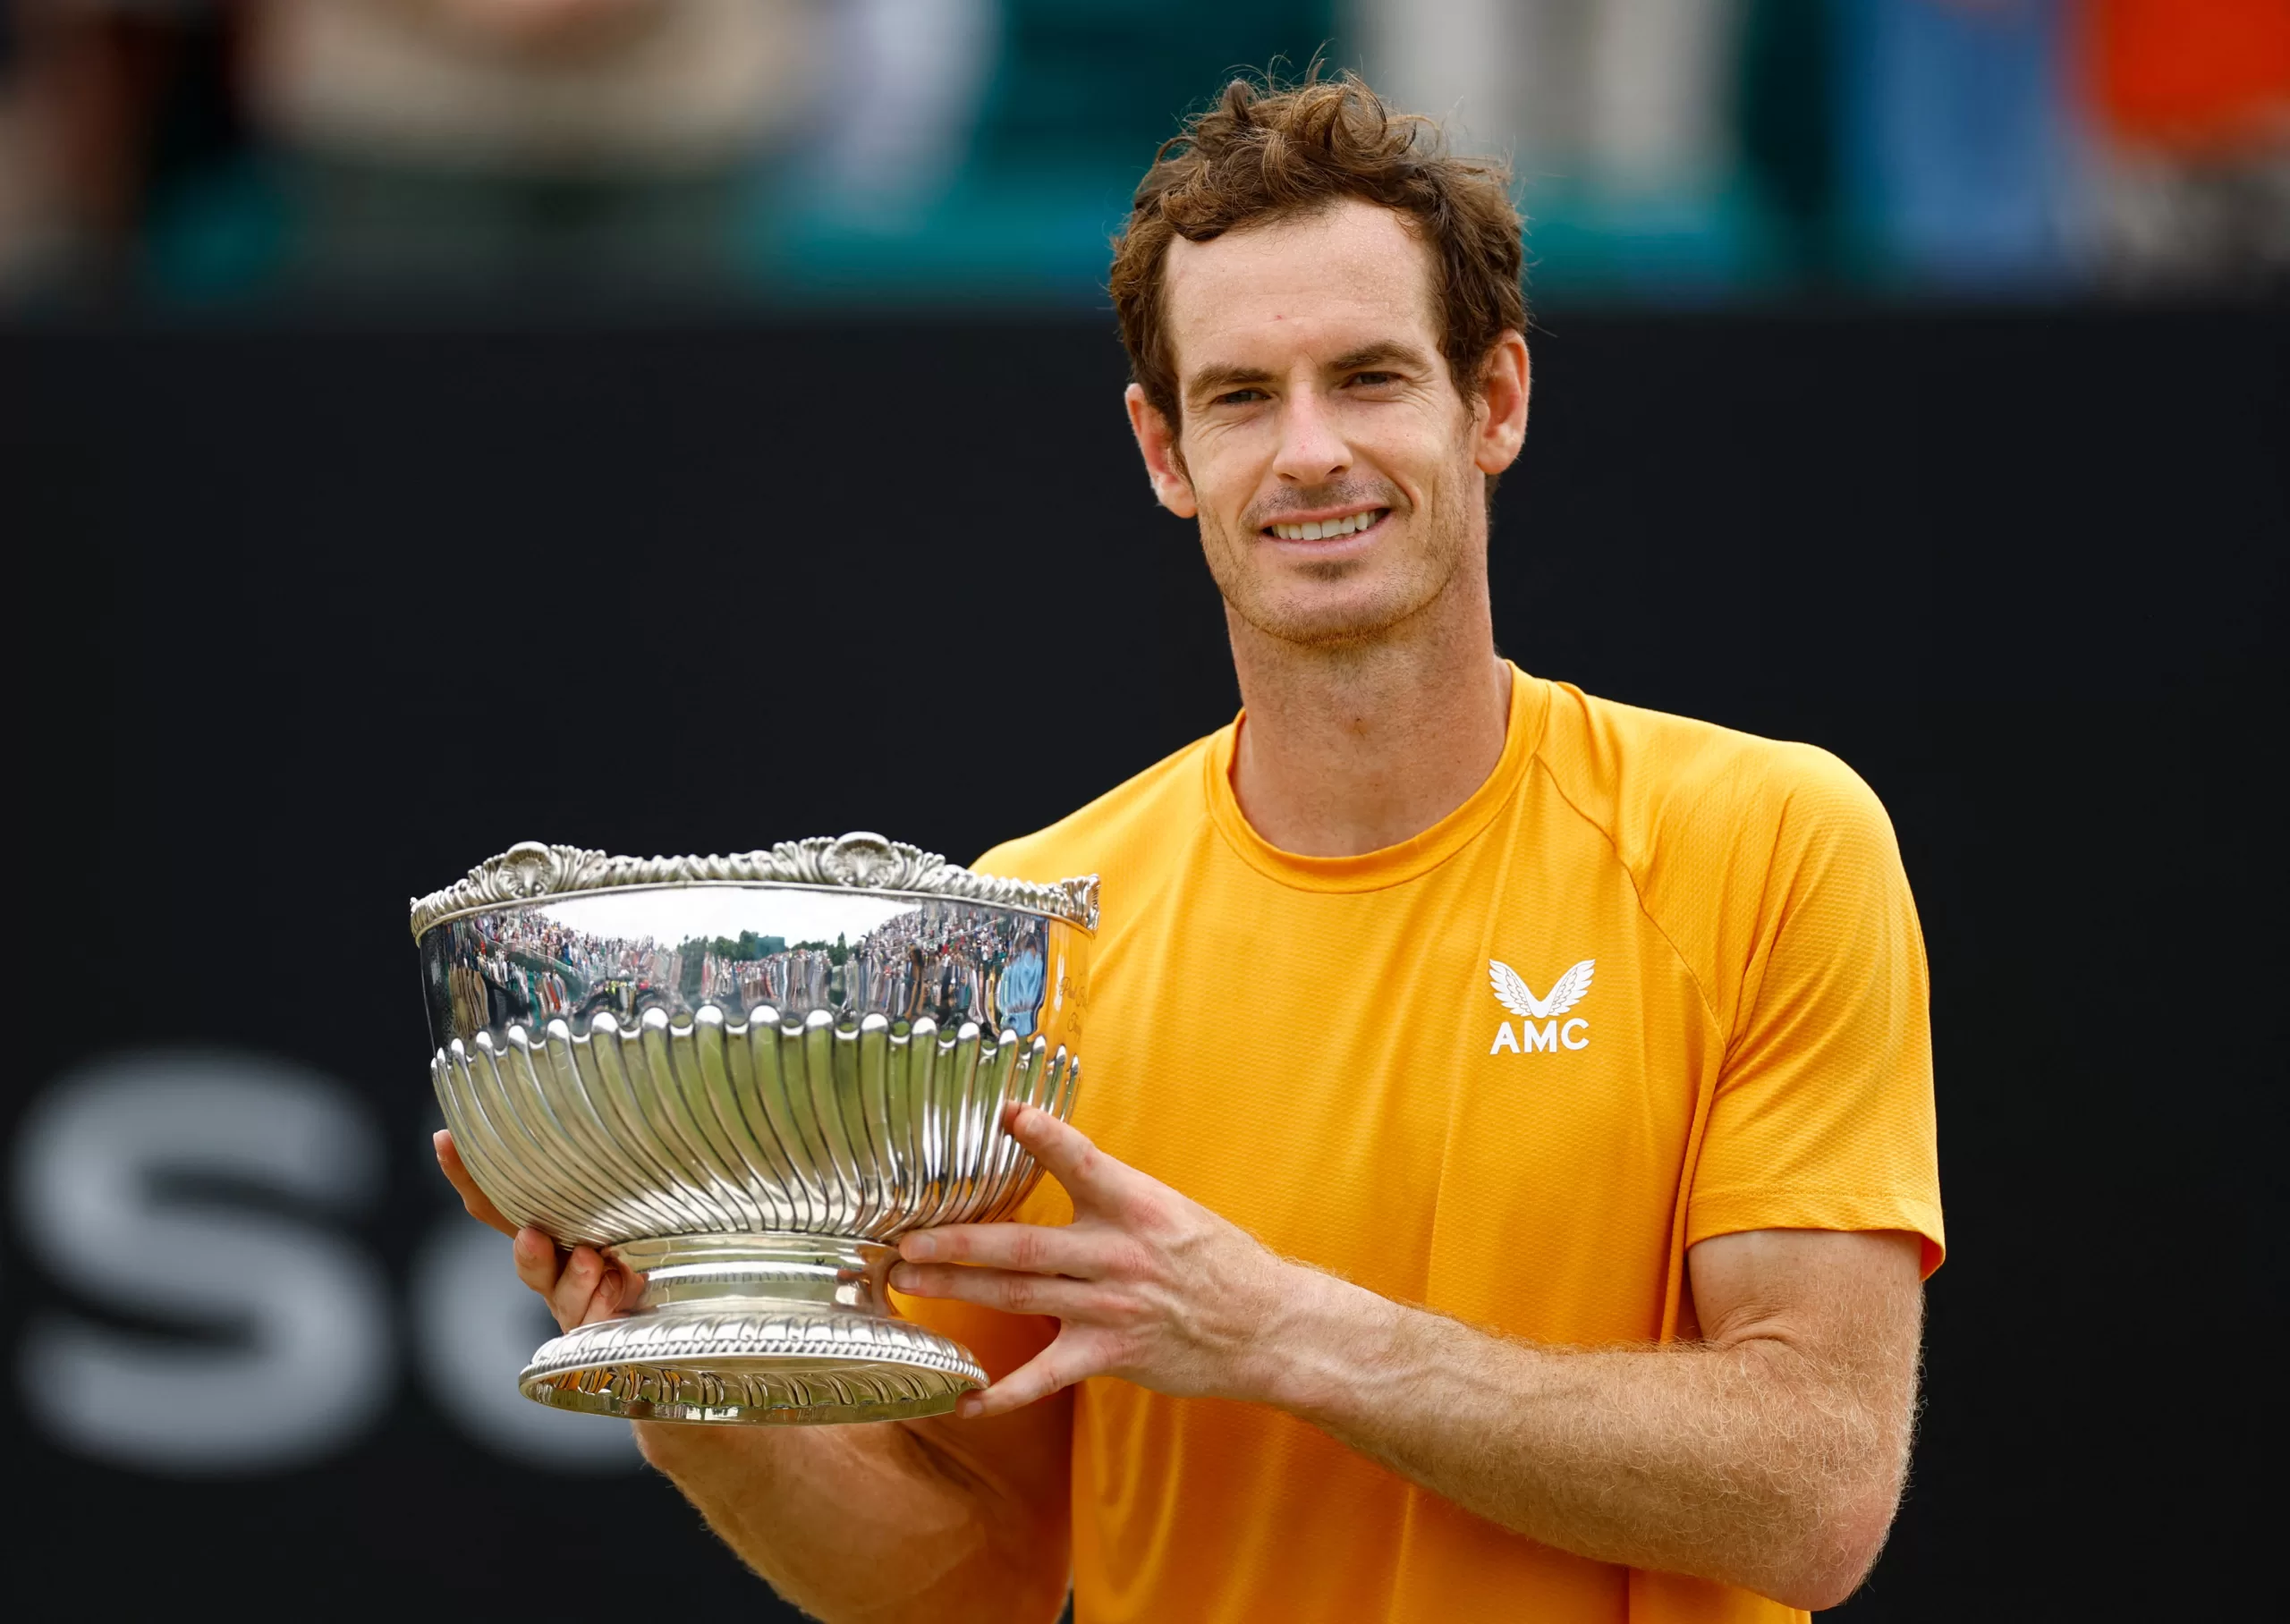 Andy Murray: Fun Facts and Winning Stats